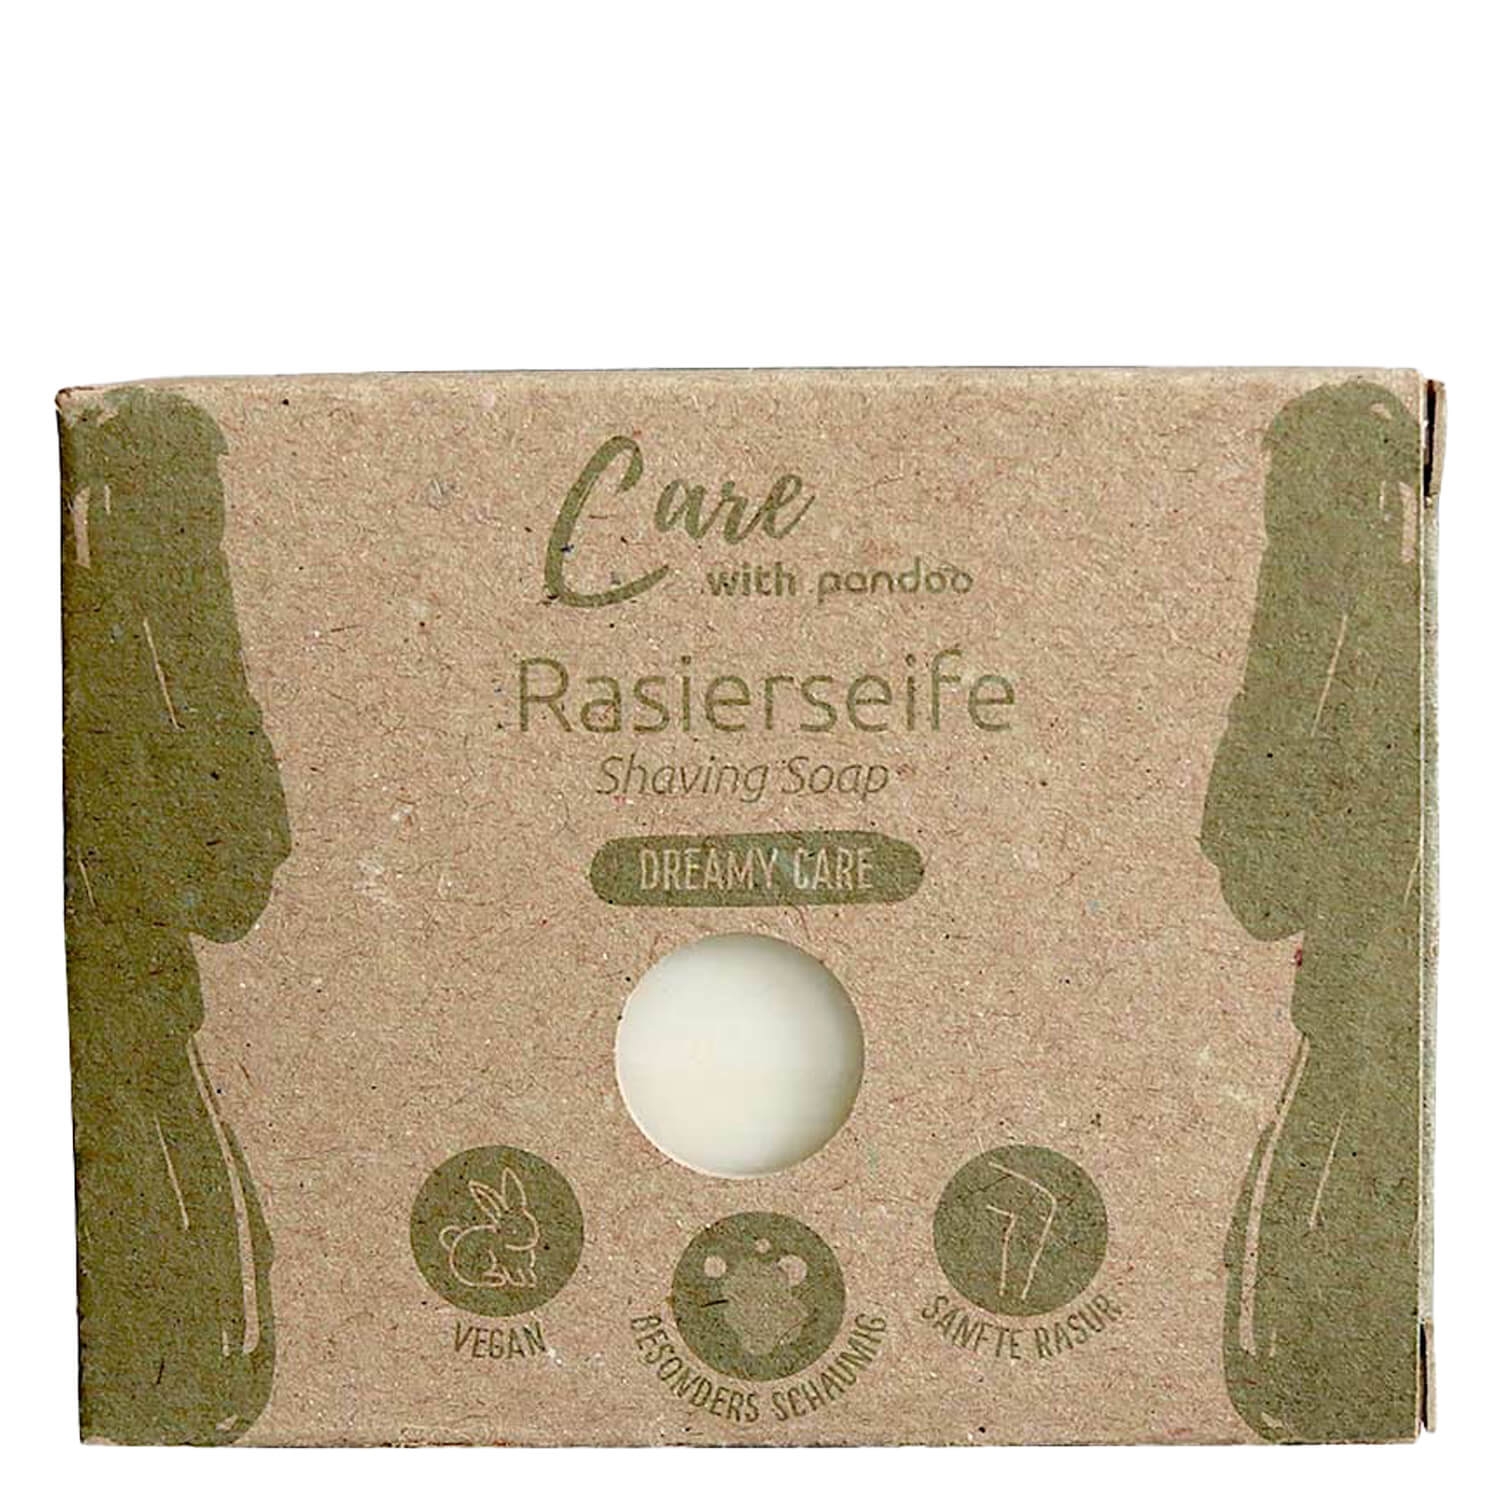 Product image from pandoo - Rasierseife Dreamy Care